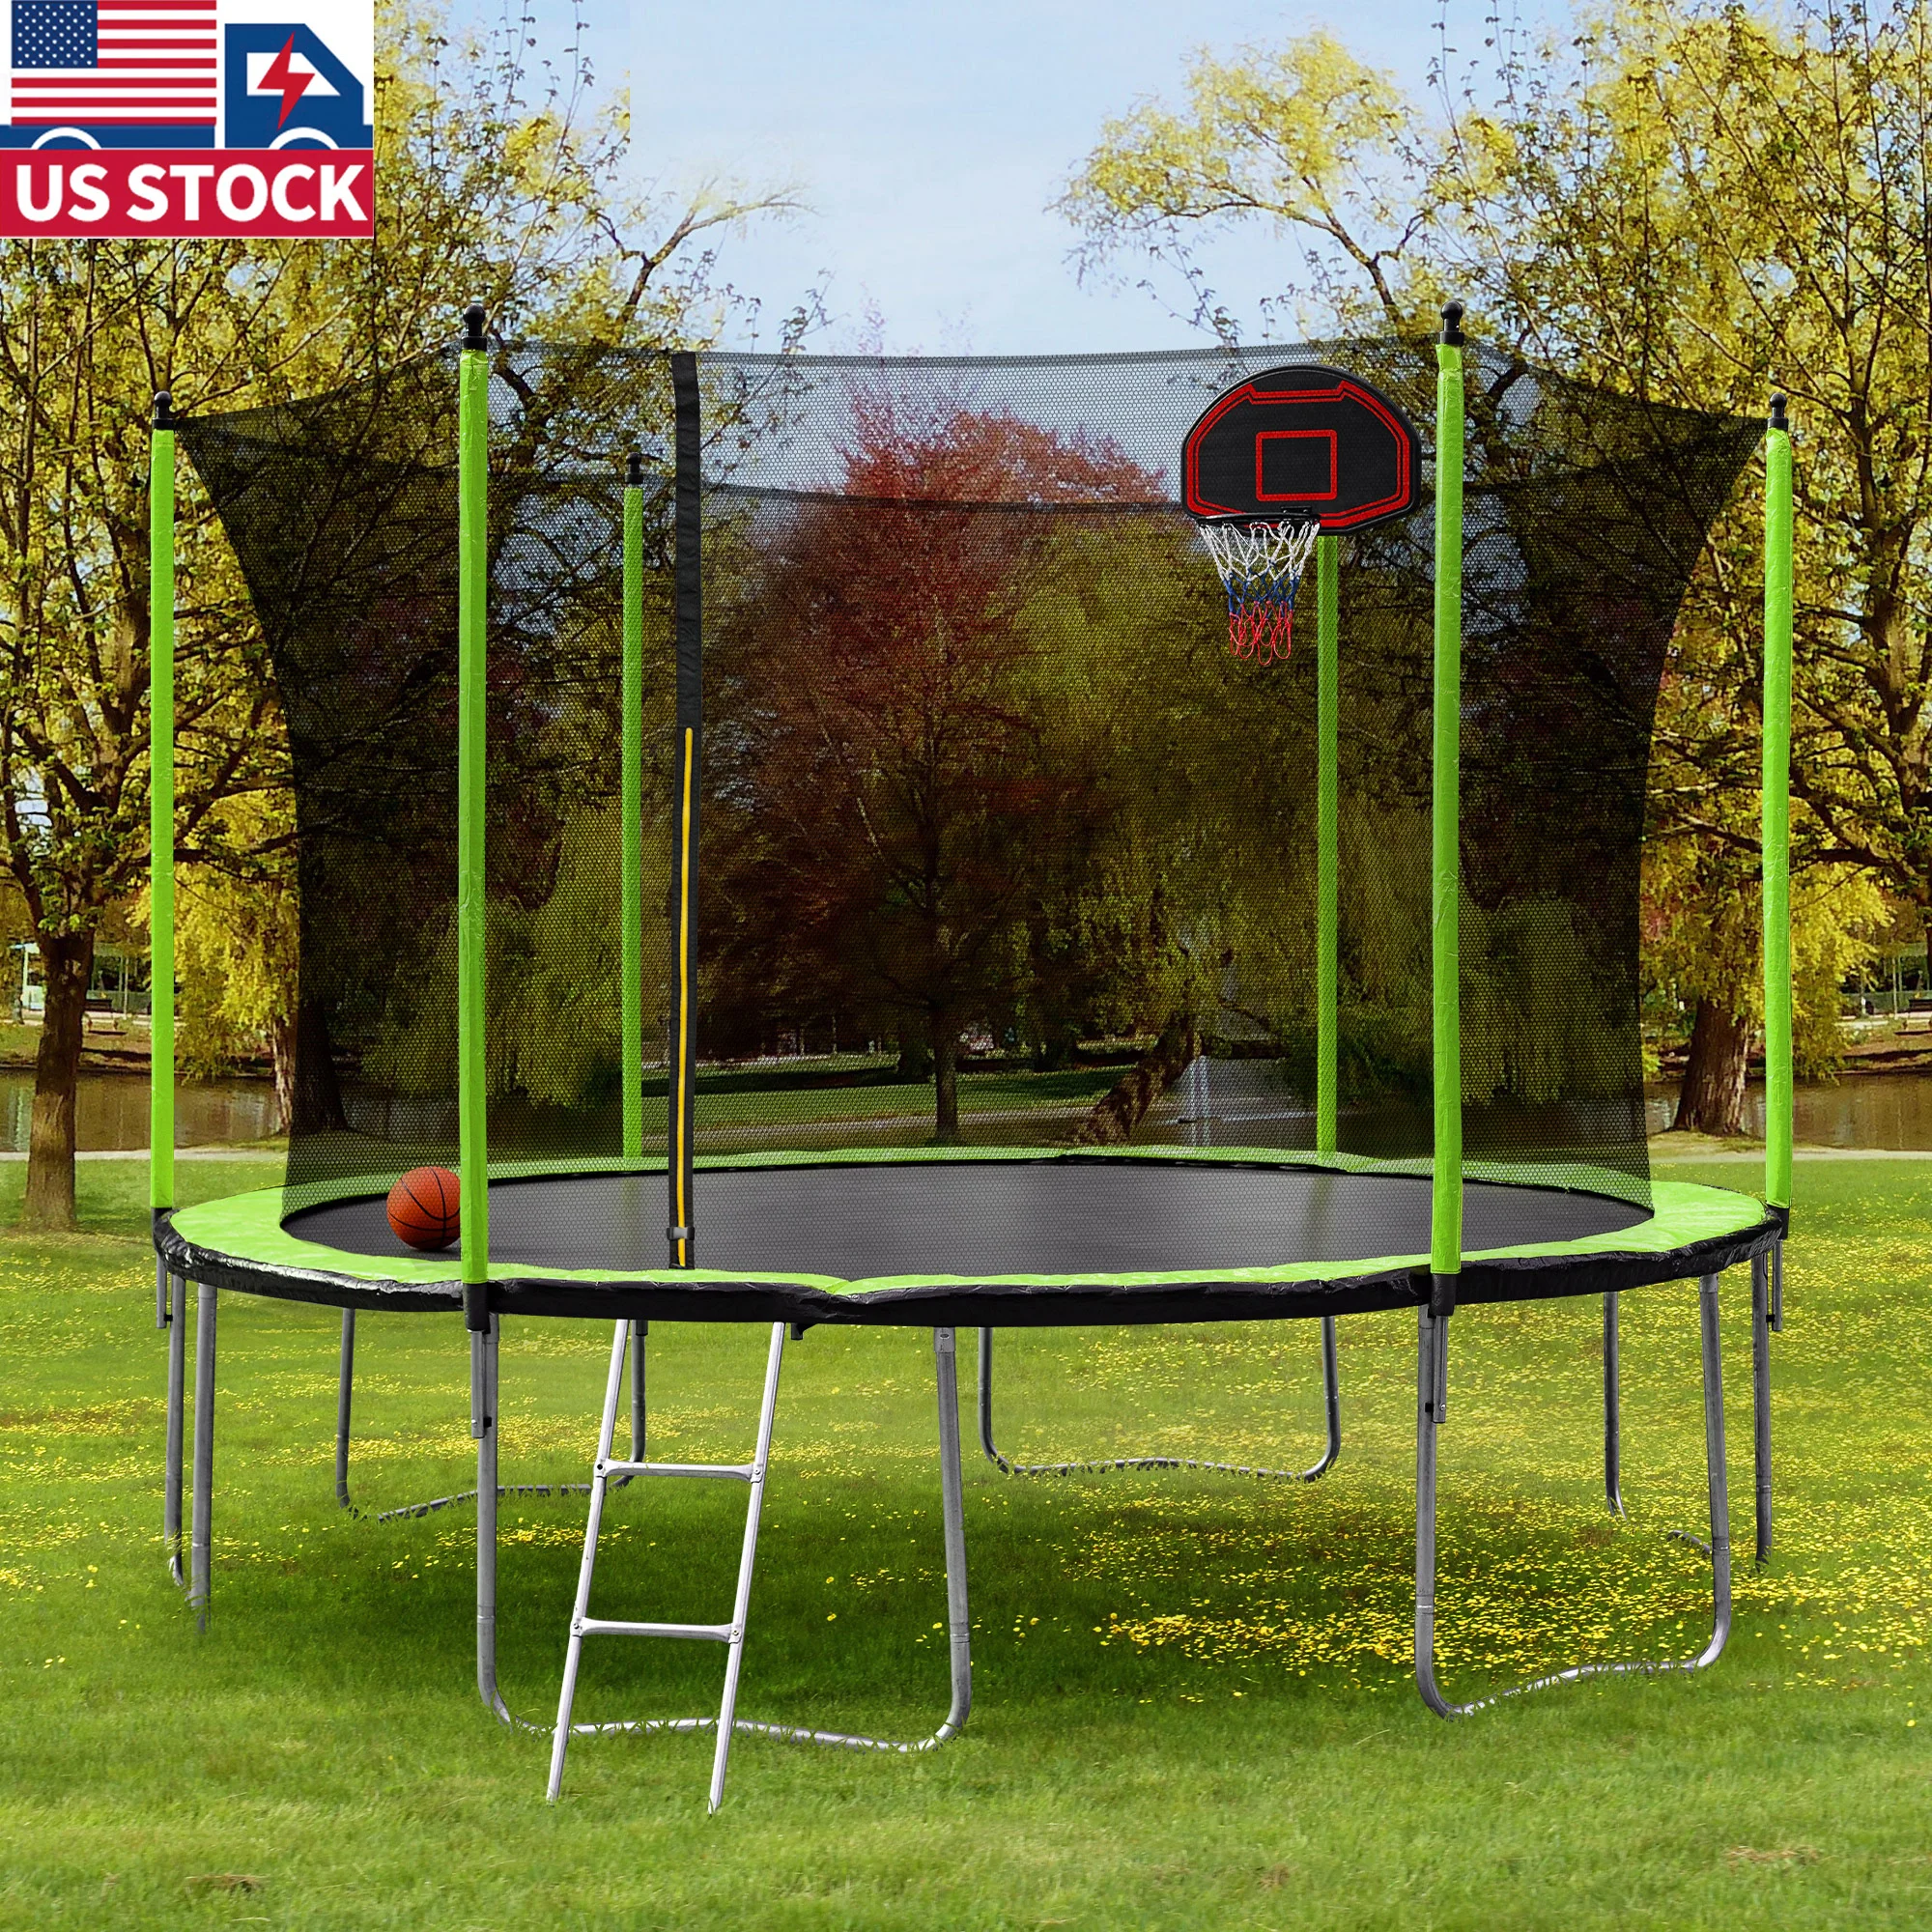 Bevestigen Menagerry pols Us Delivery Outdoor Cheap Trampoline 366cm For Kids Gift Happy Jumping -  Buy Trampoline 366 Cm,Outdoor Cheap Trampoline,On Floor Trampoline Product  on Alibaba.com